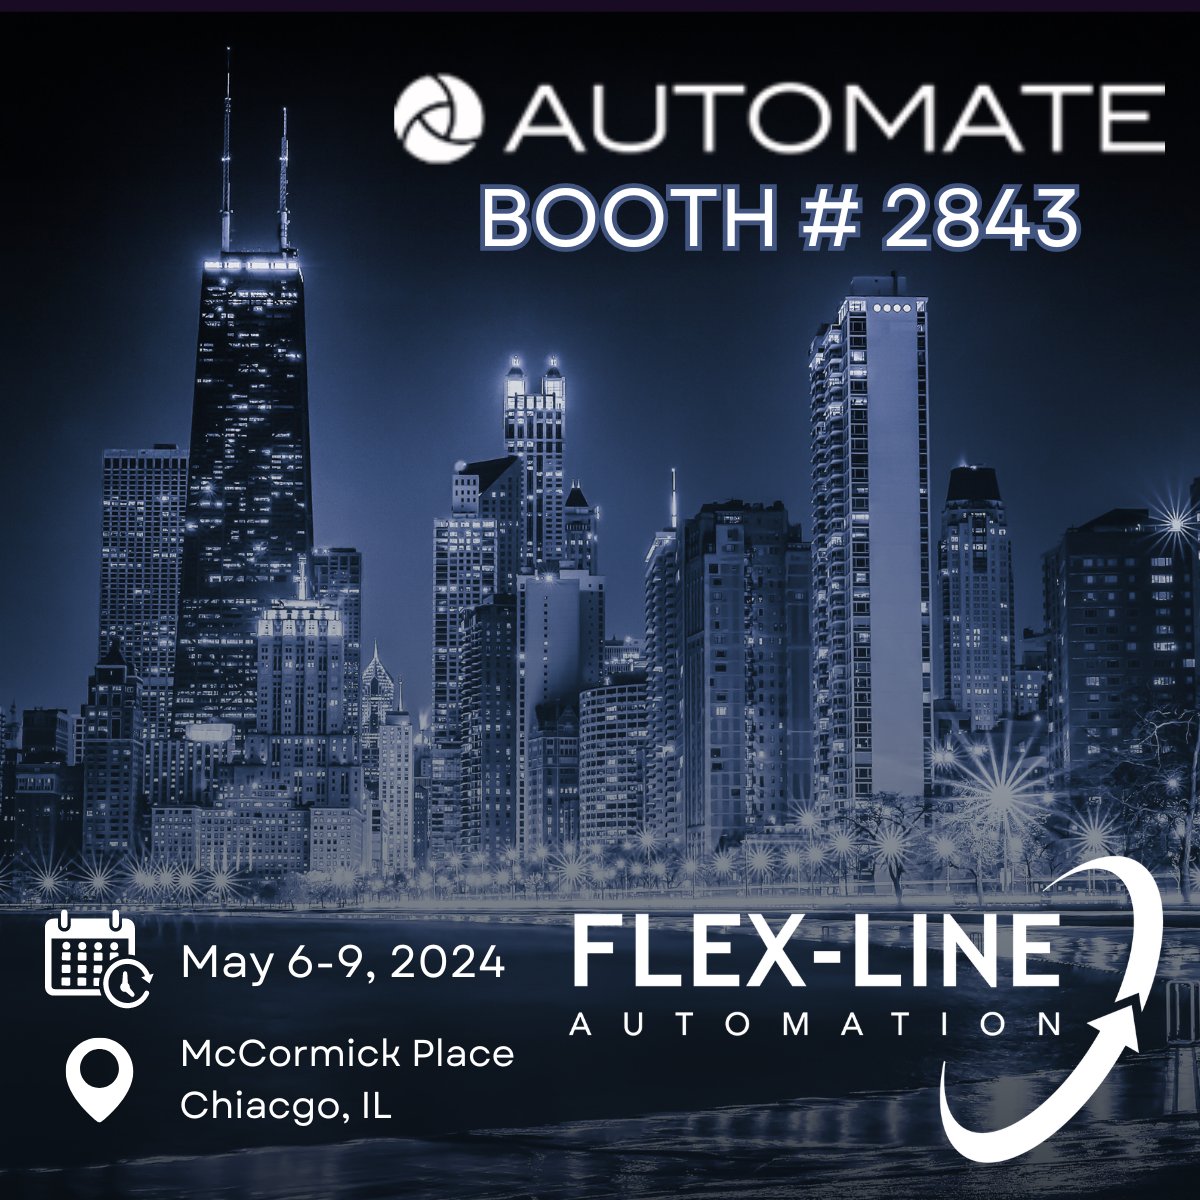 Happy first day of AUTOMATE 2024! See you soon in booth # 2843!

#automate #tradeshow #automationshow #bestoneyet